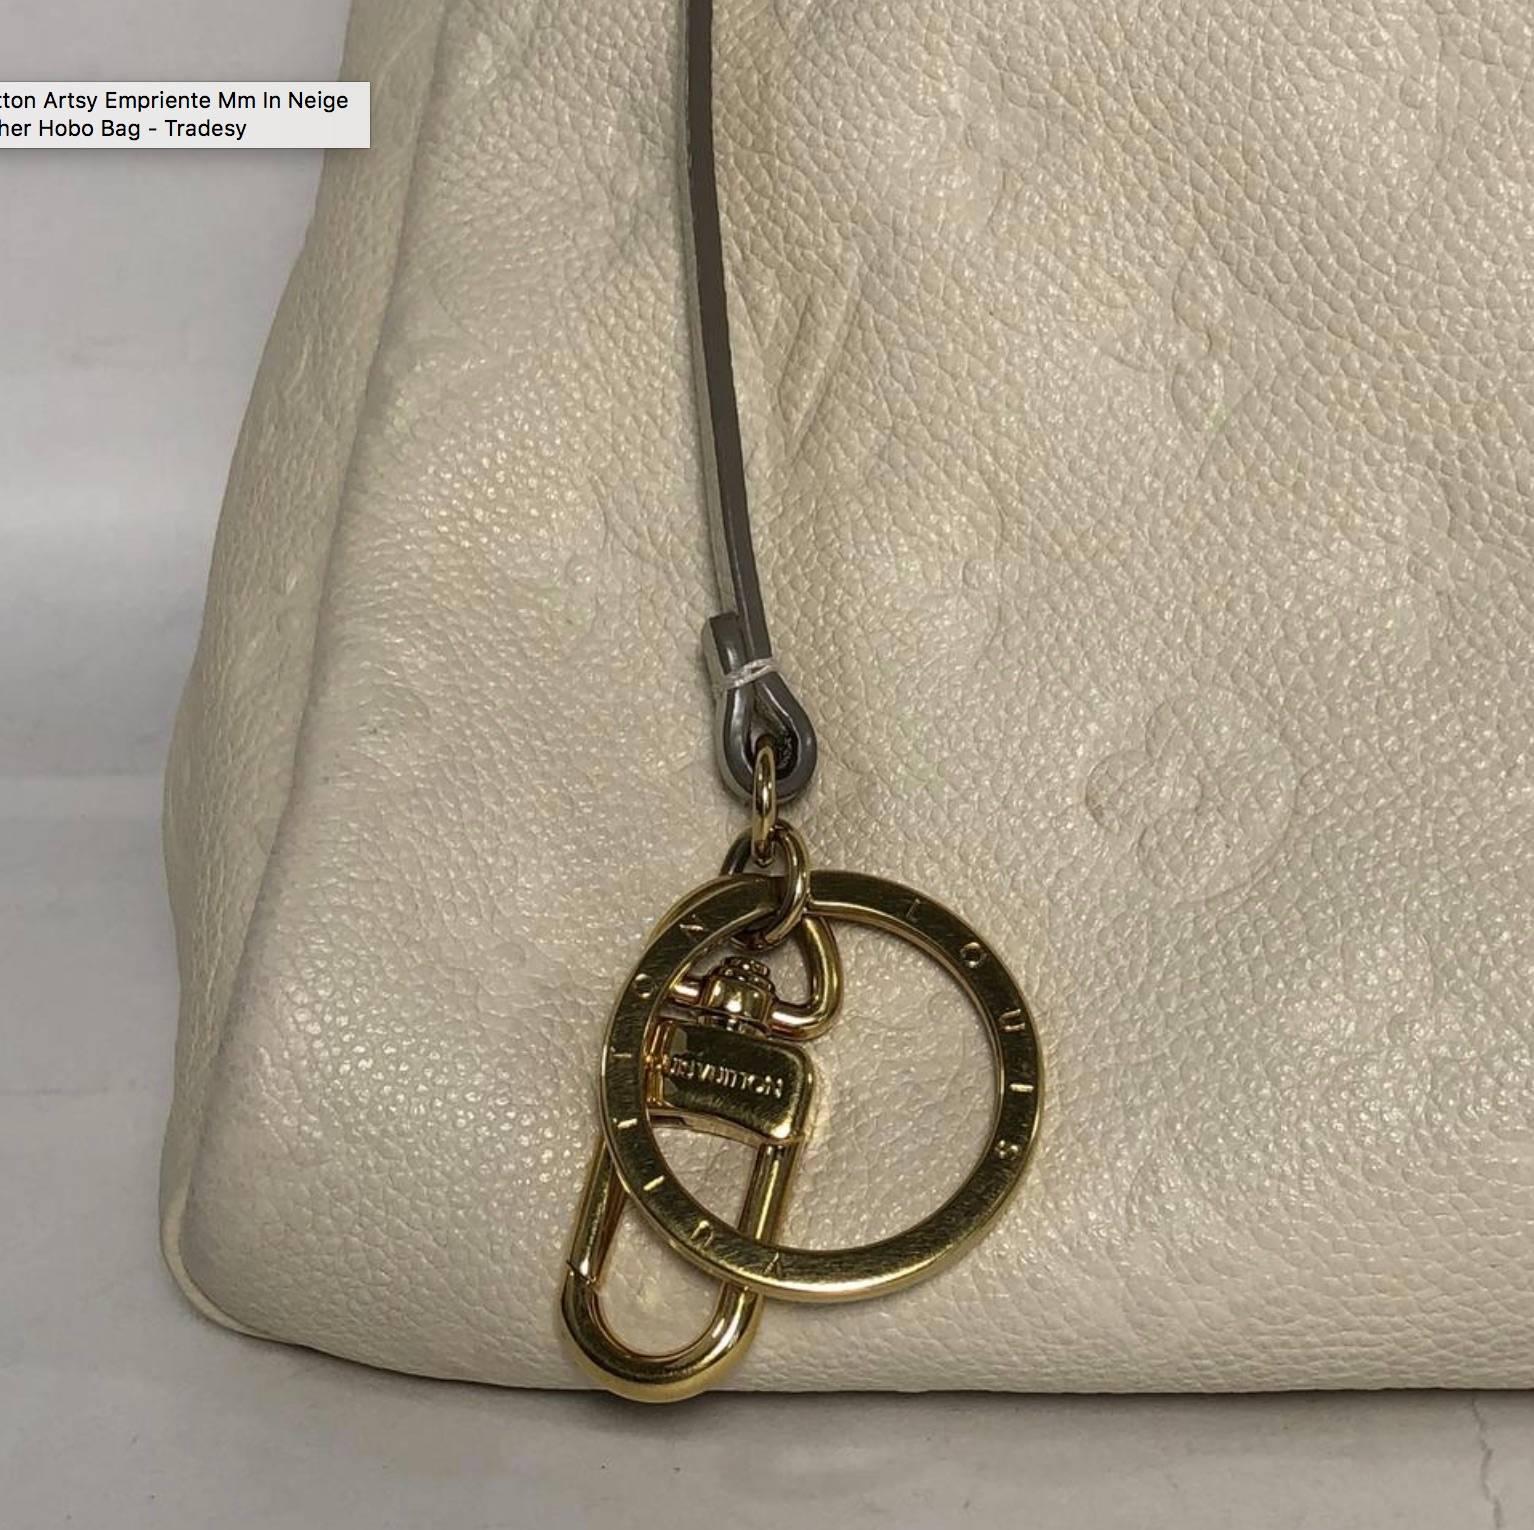 Louis Vuitton Empriente Artsy MM in Neige Hobo Bag In Good Condition For Sale In Saint Charles, IL